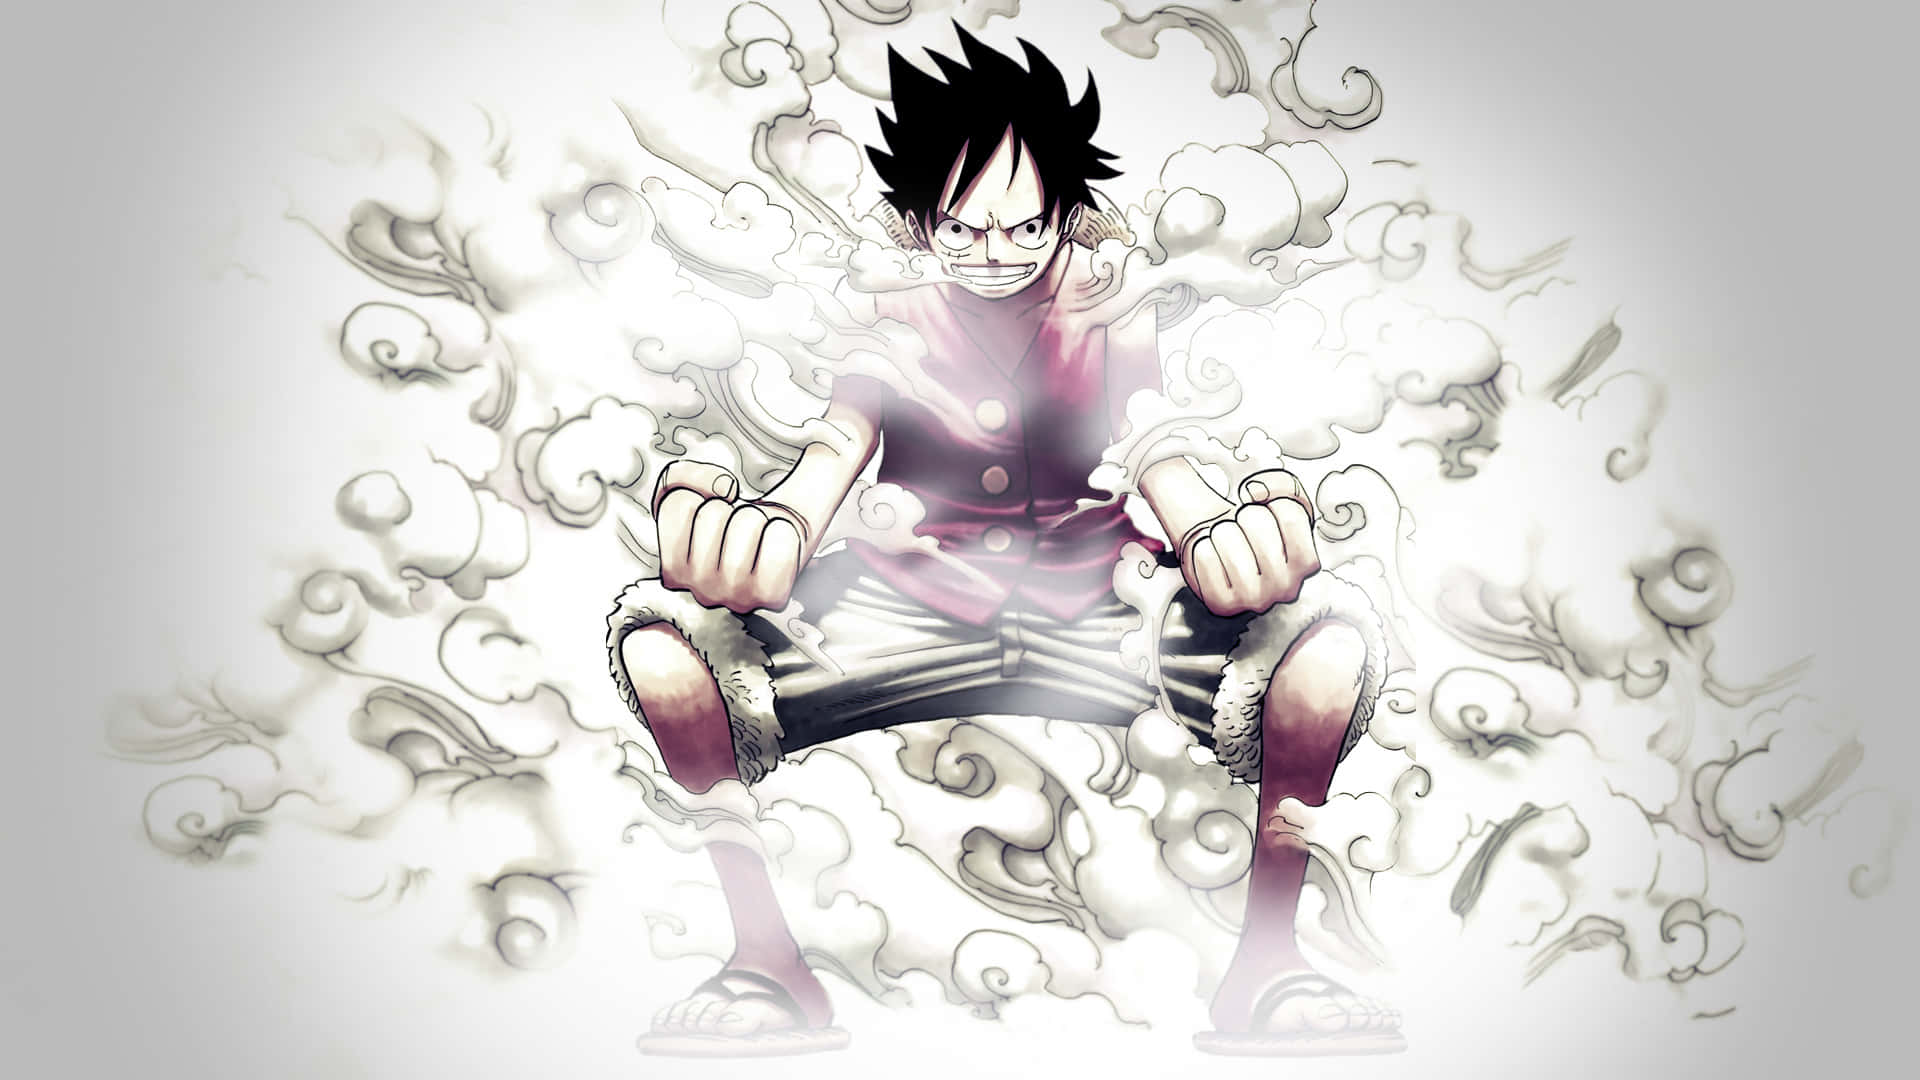 One Piece's Pirate King: Monkey D. Luffy